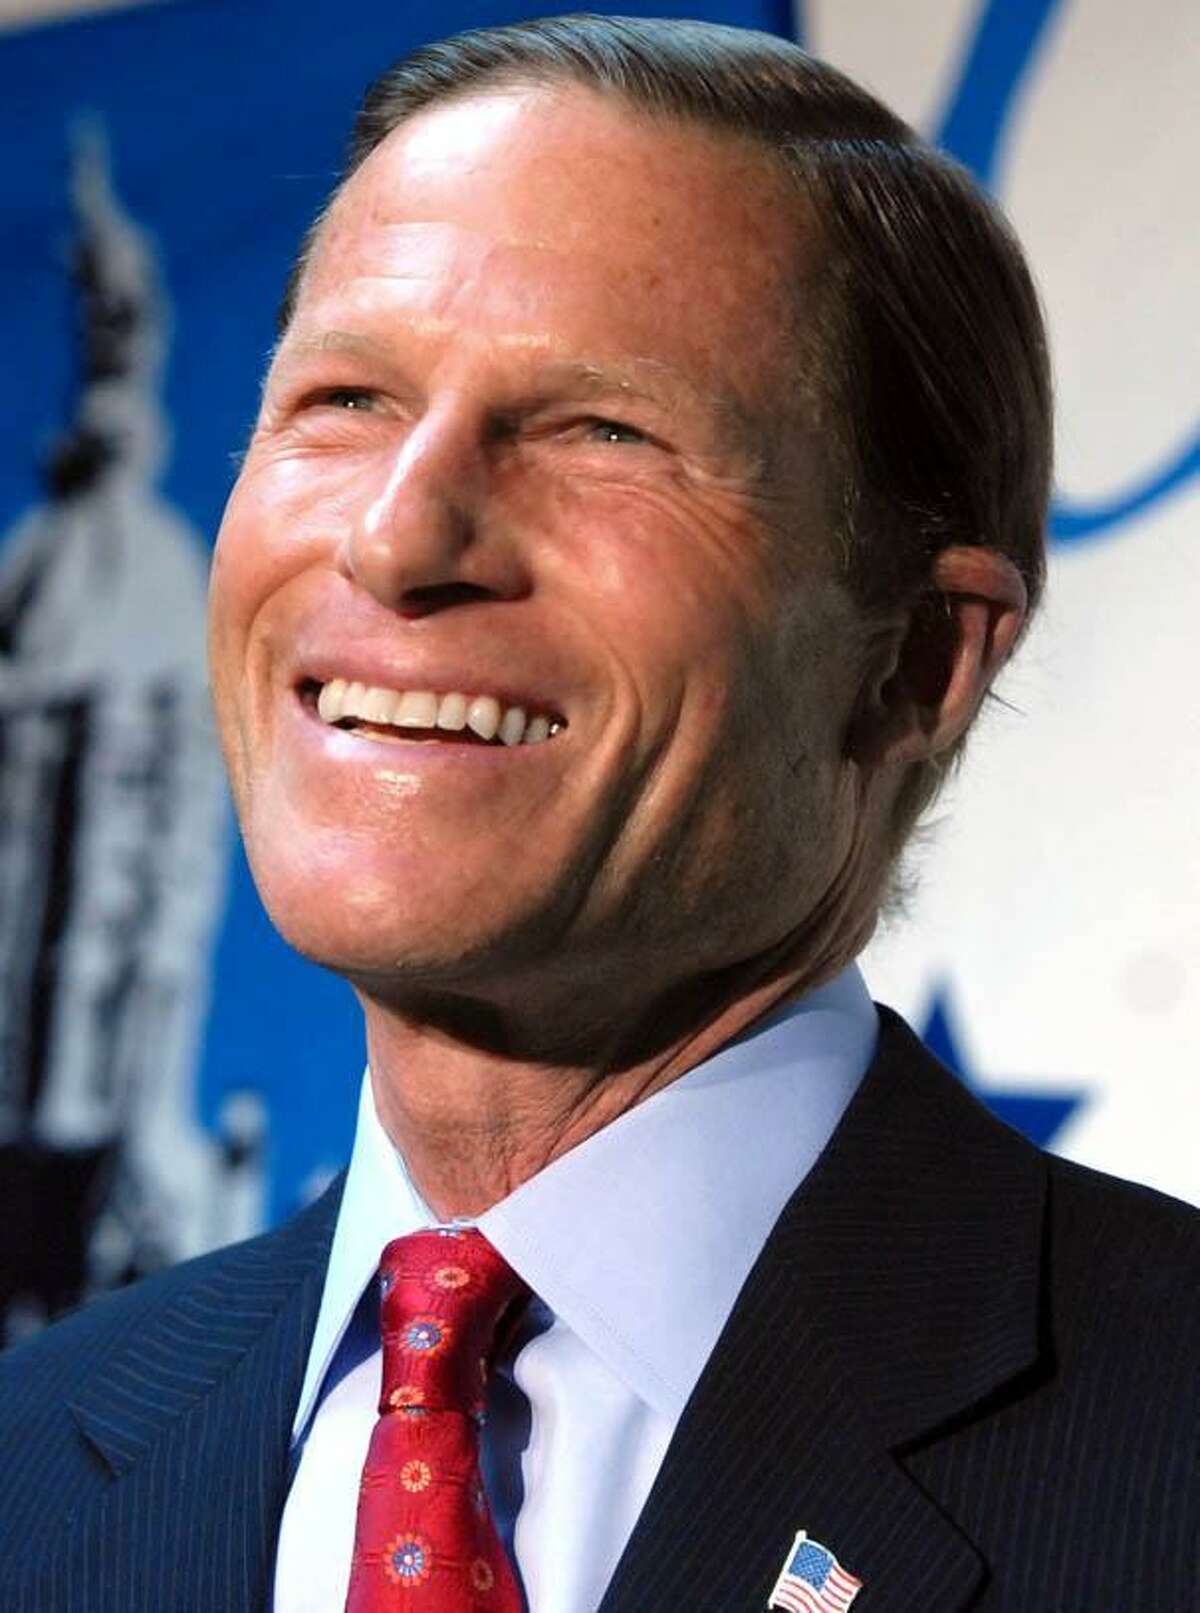 1/6/10 1BlumenthalML0595QState Democratic Headquarters, Hartford: Attorney General Richard Blumenthal during his press conference announcing that he will seek the Senate seat being vacated by Sen. Christopher Dodd. Photo by Mara Lavitt